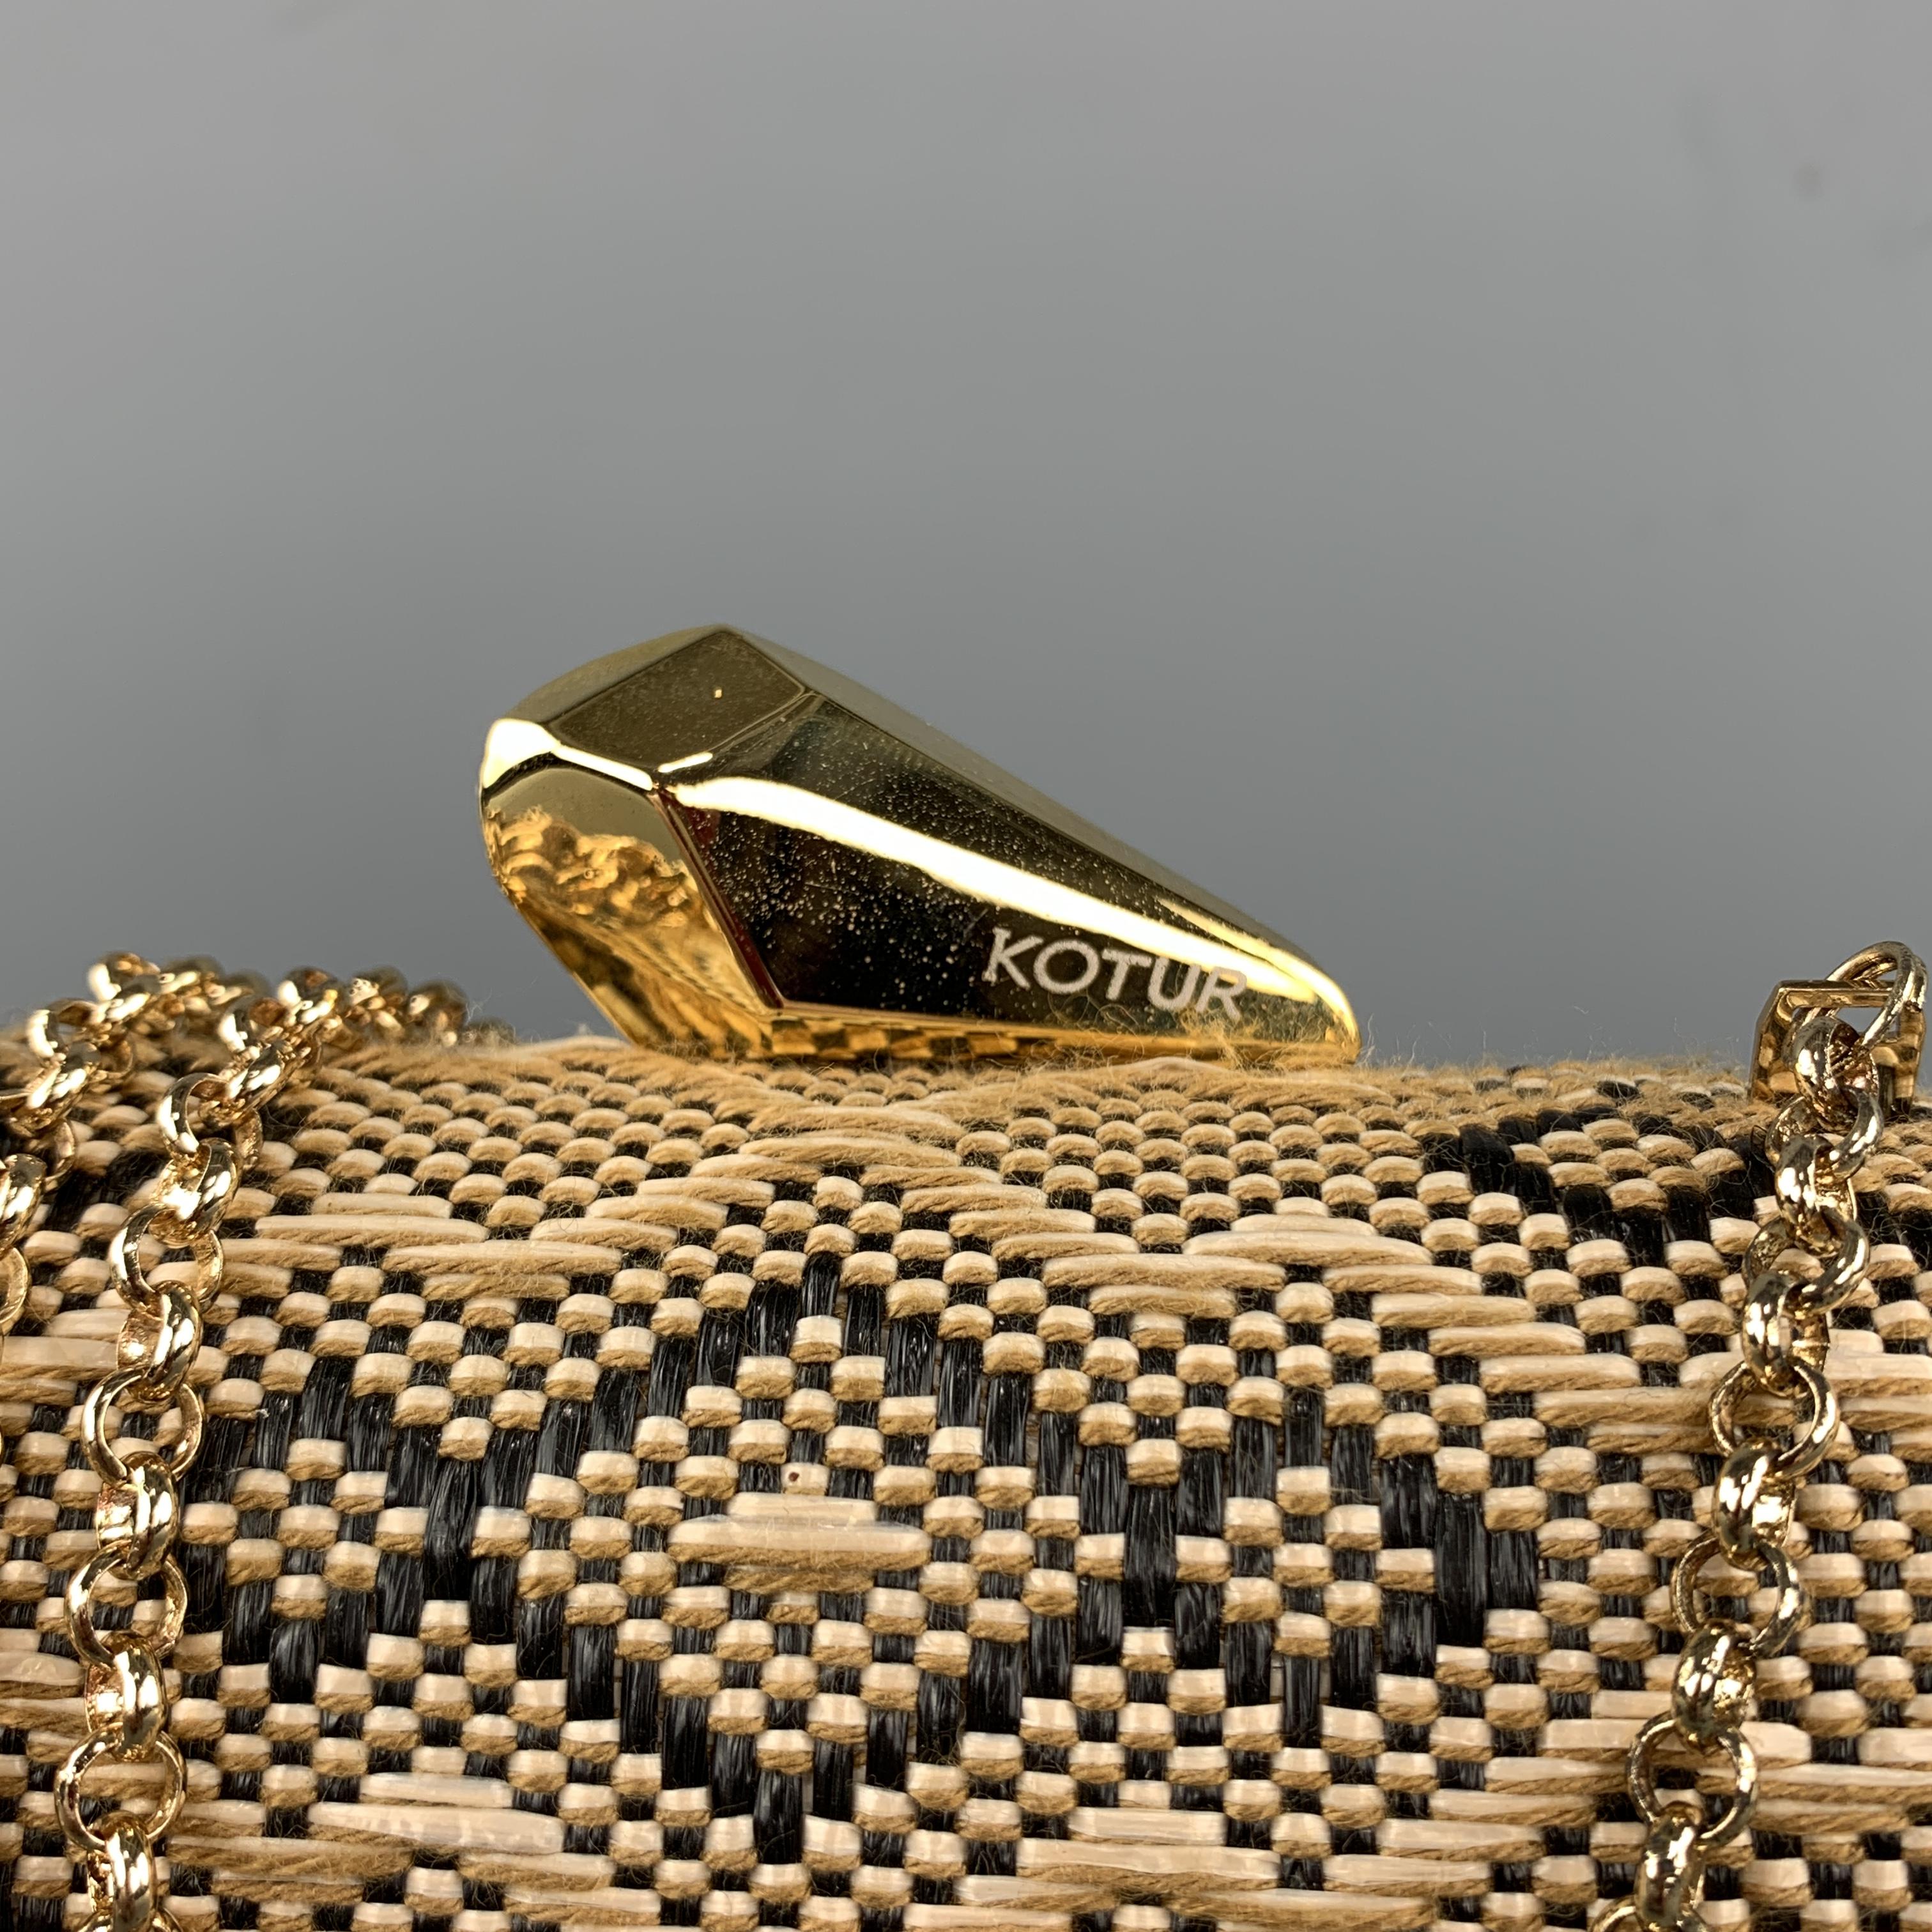 KOTUR Handbag comes in beige and black tones in a fabric woven material, with a gold chain, a gold metal tone hardware at closure, and a inner pocket.
 
Excellent Pre-Owned Condition.
 
Measurements:
 
Length: 6.5 in.
Width: 2 in.
Height: 4.5 and